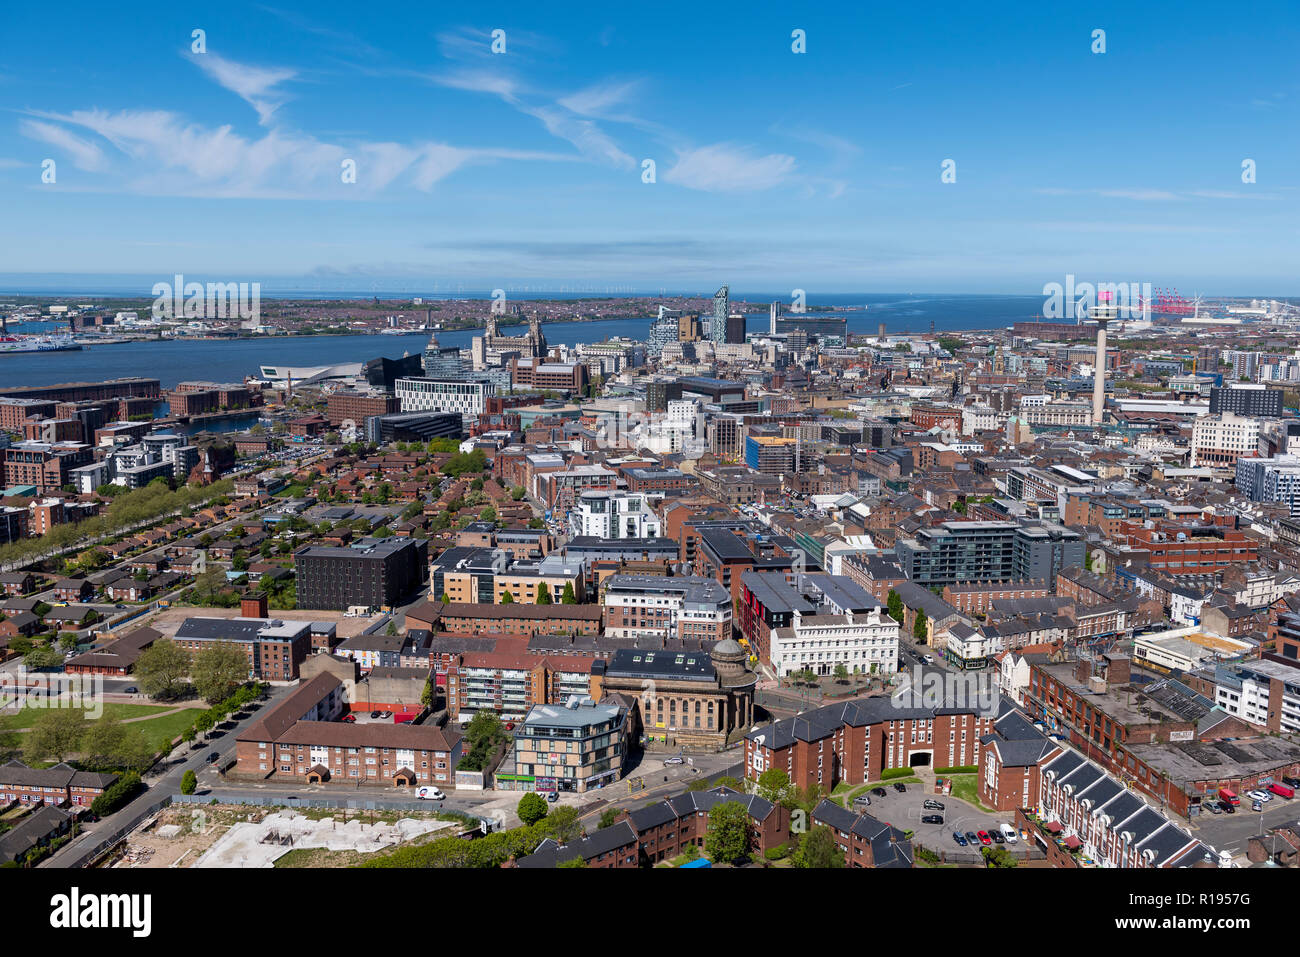 View of Liverpool City Centre skyline looking towards the River Mersey, Wirral, and Crosby in the distance Stock Photo